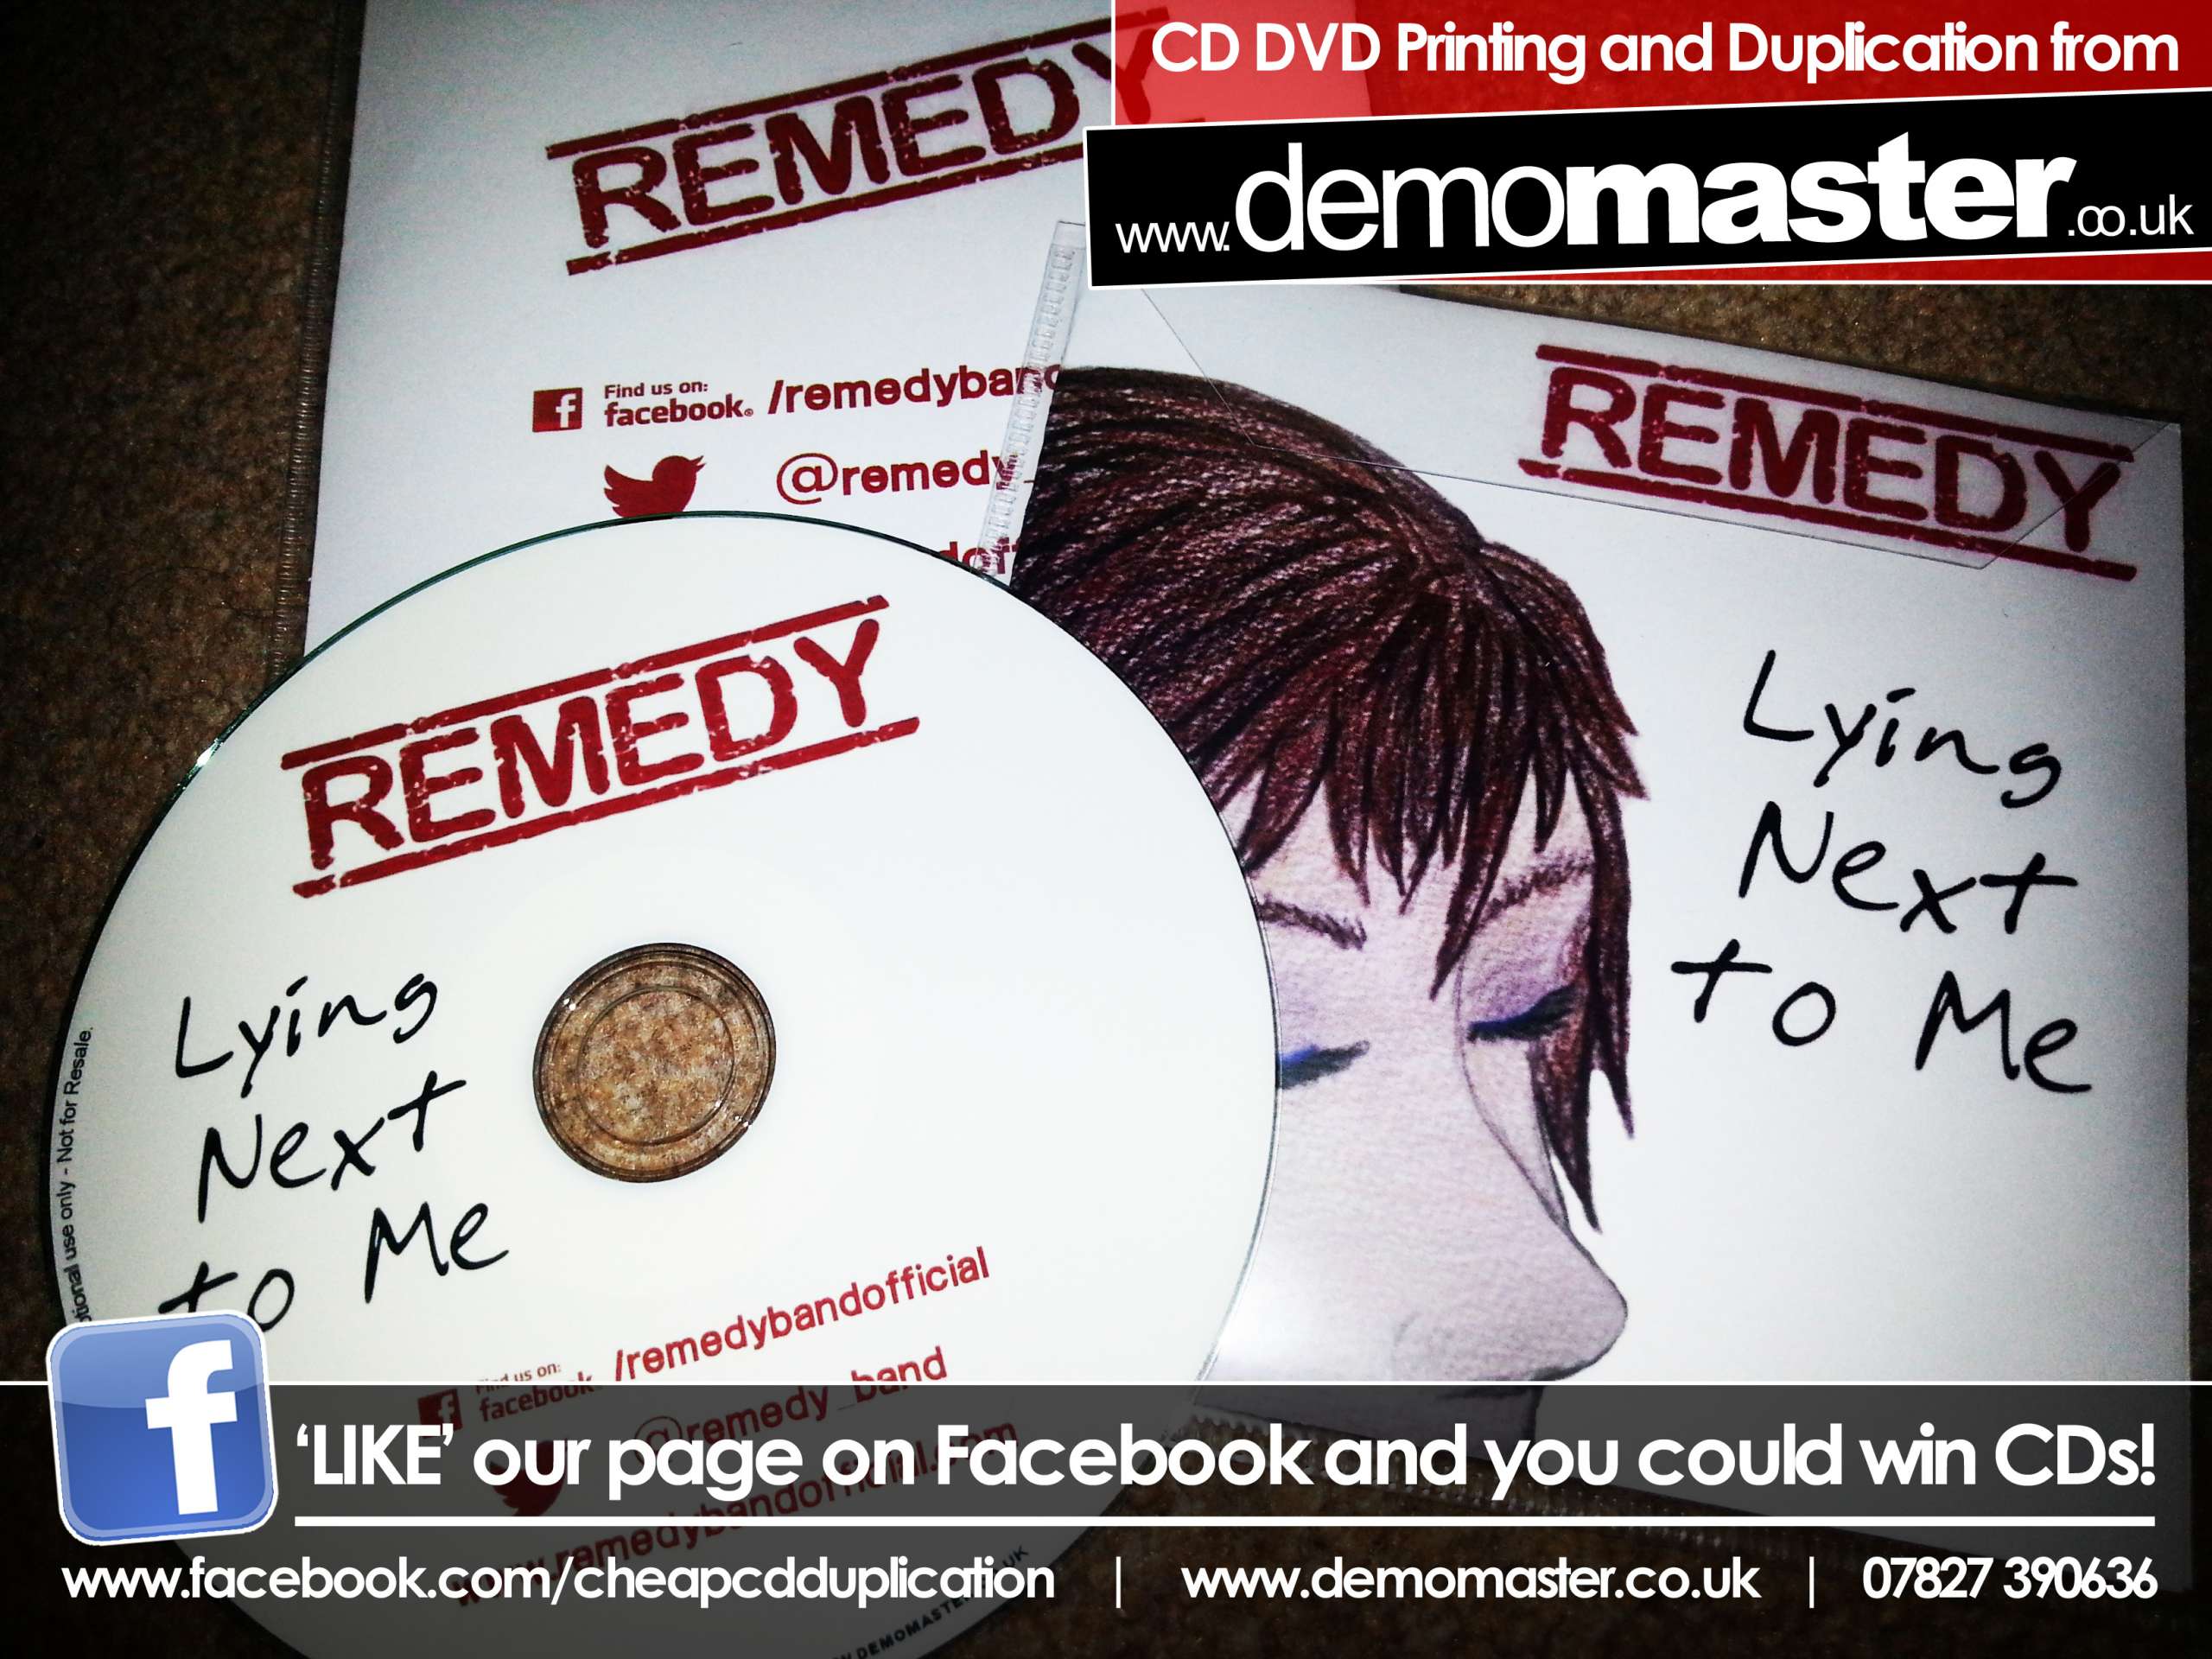 Remedy - Lying Next To Me